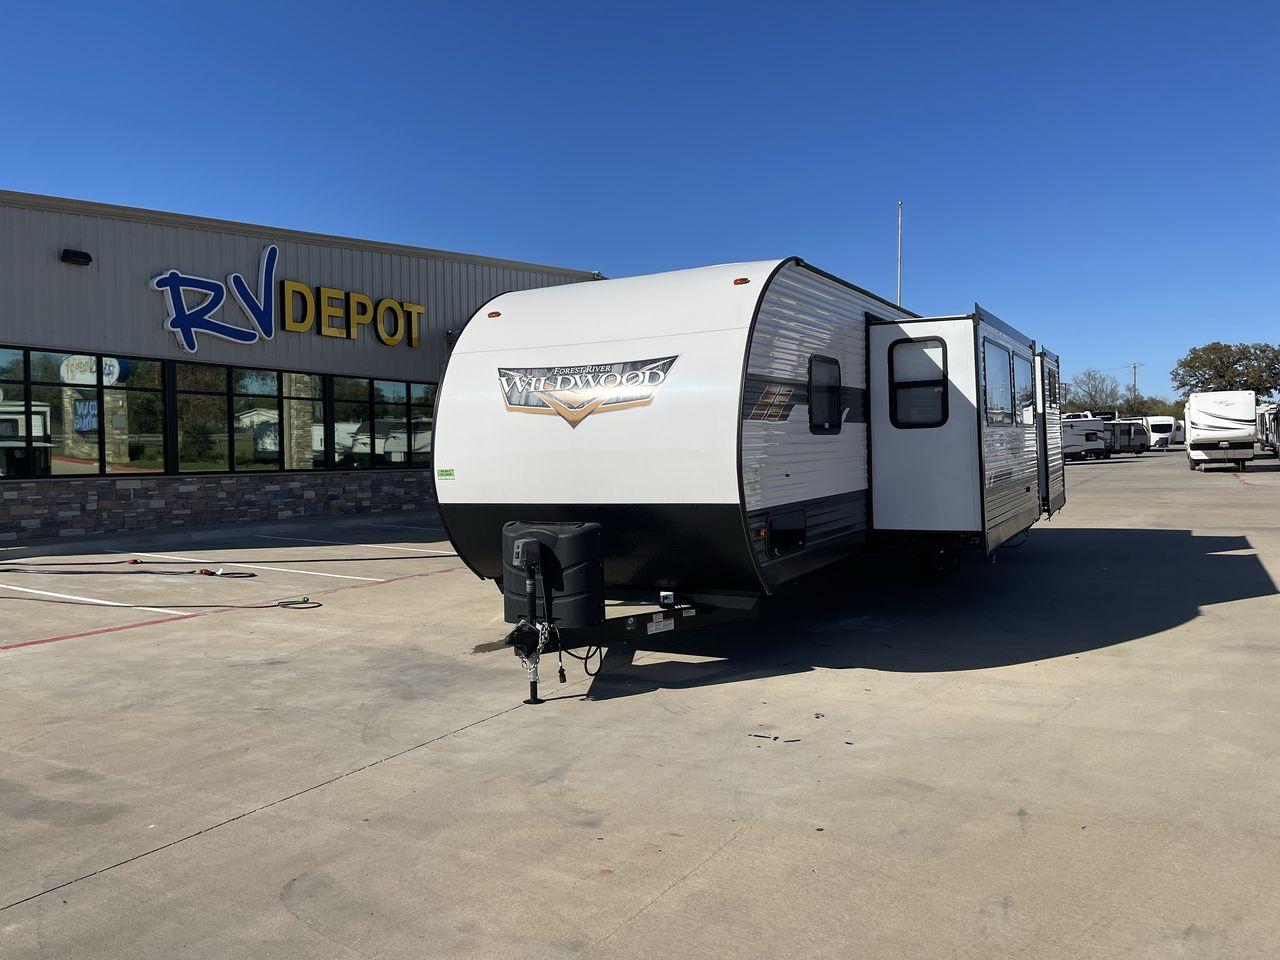 2022 FOREST RIVER WILDWOOD 31KQBTS (4X4TWDG2XN8) , Length: 36.58 ft | Dry Weight: 8,573 lbs. | Slides: 3 transmission, located at 4319 N Main St, Cleburne, TX, 76033, (817) 678-5133, 32.385960, -97.391212 - Looking for a spacious and comfortable travel trailer for your next adventure? Look no further than this 2022 Forest River Wildwood 31KQBTS, available for sale at RV Depot in Cleburne, TX. With its impressive features and unbeatable price of $42,995, this travel trailer is the perfect choice for fam - Photo #27